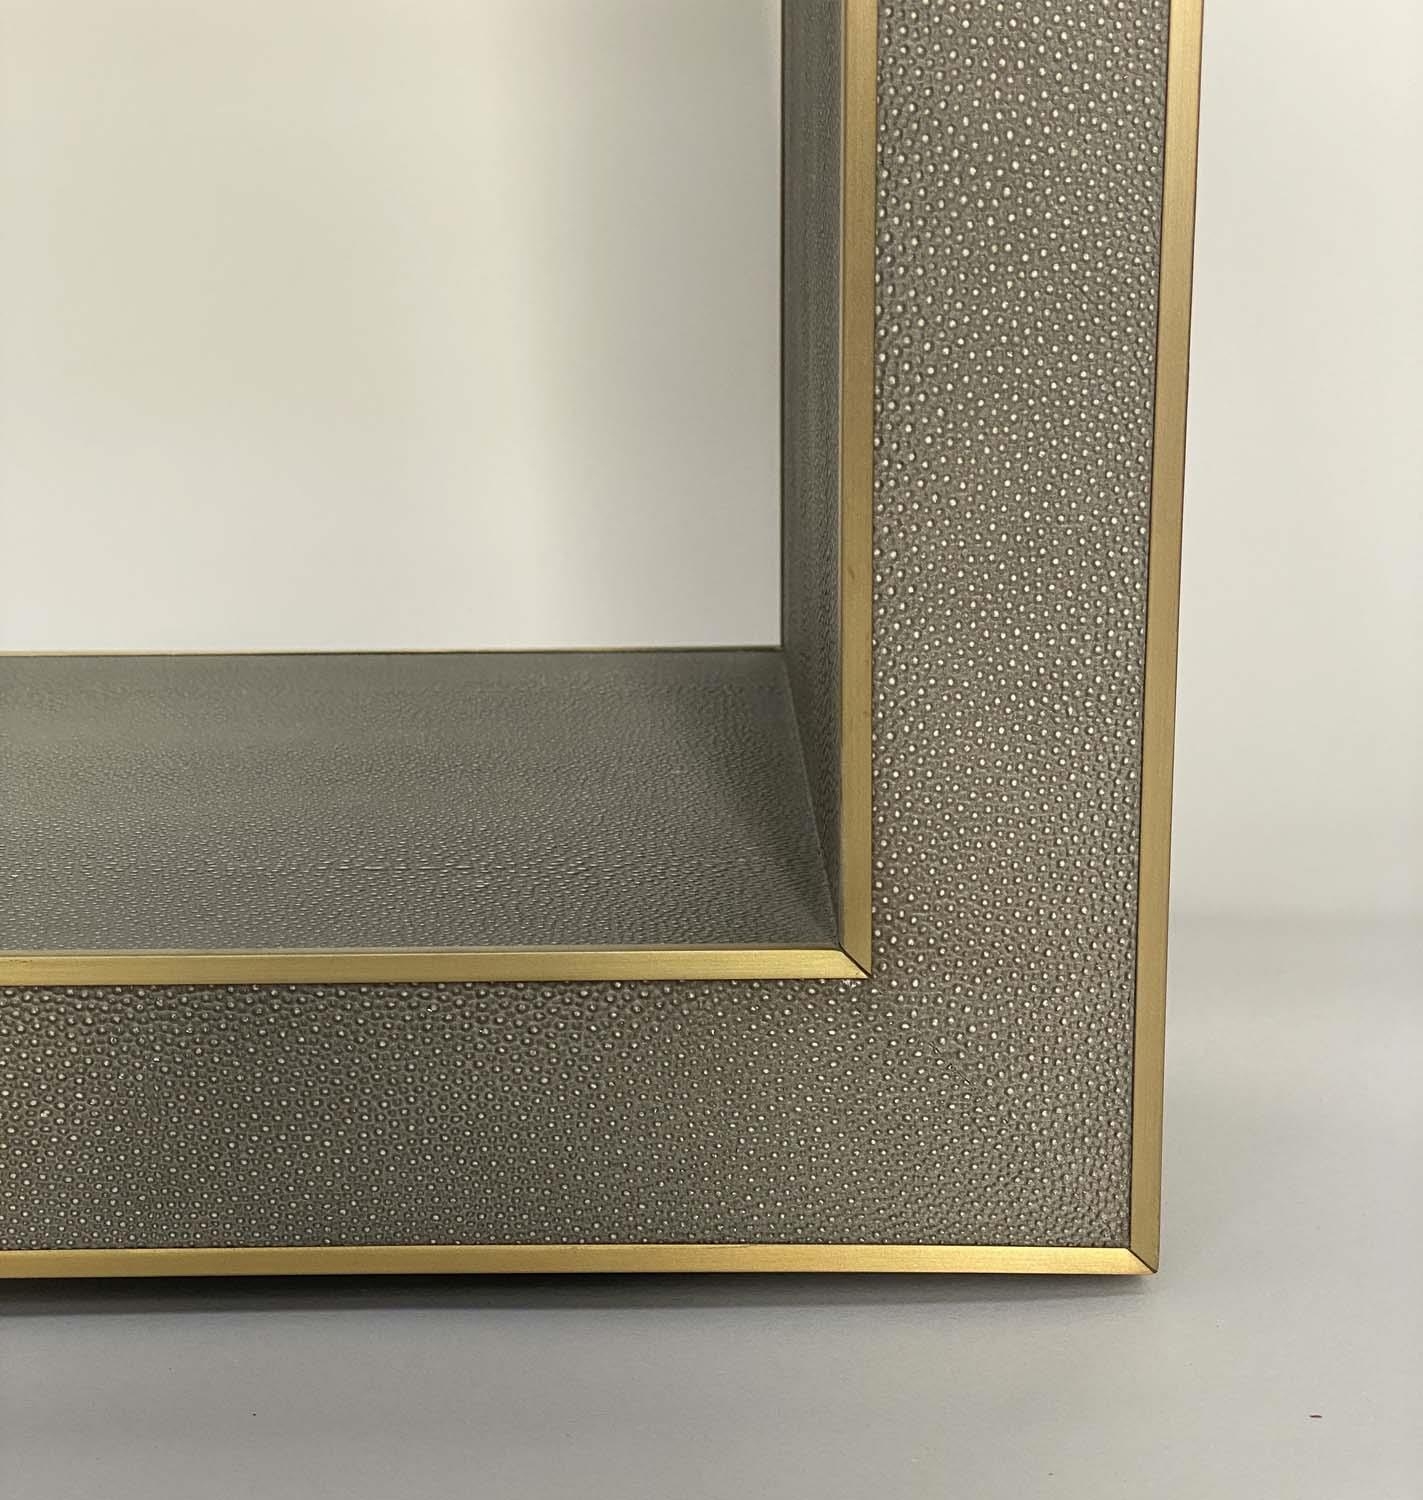 CONSOLE TABLE, faux shagreen with gilt accenting, 170cm W. - Image 2 of 7